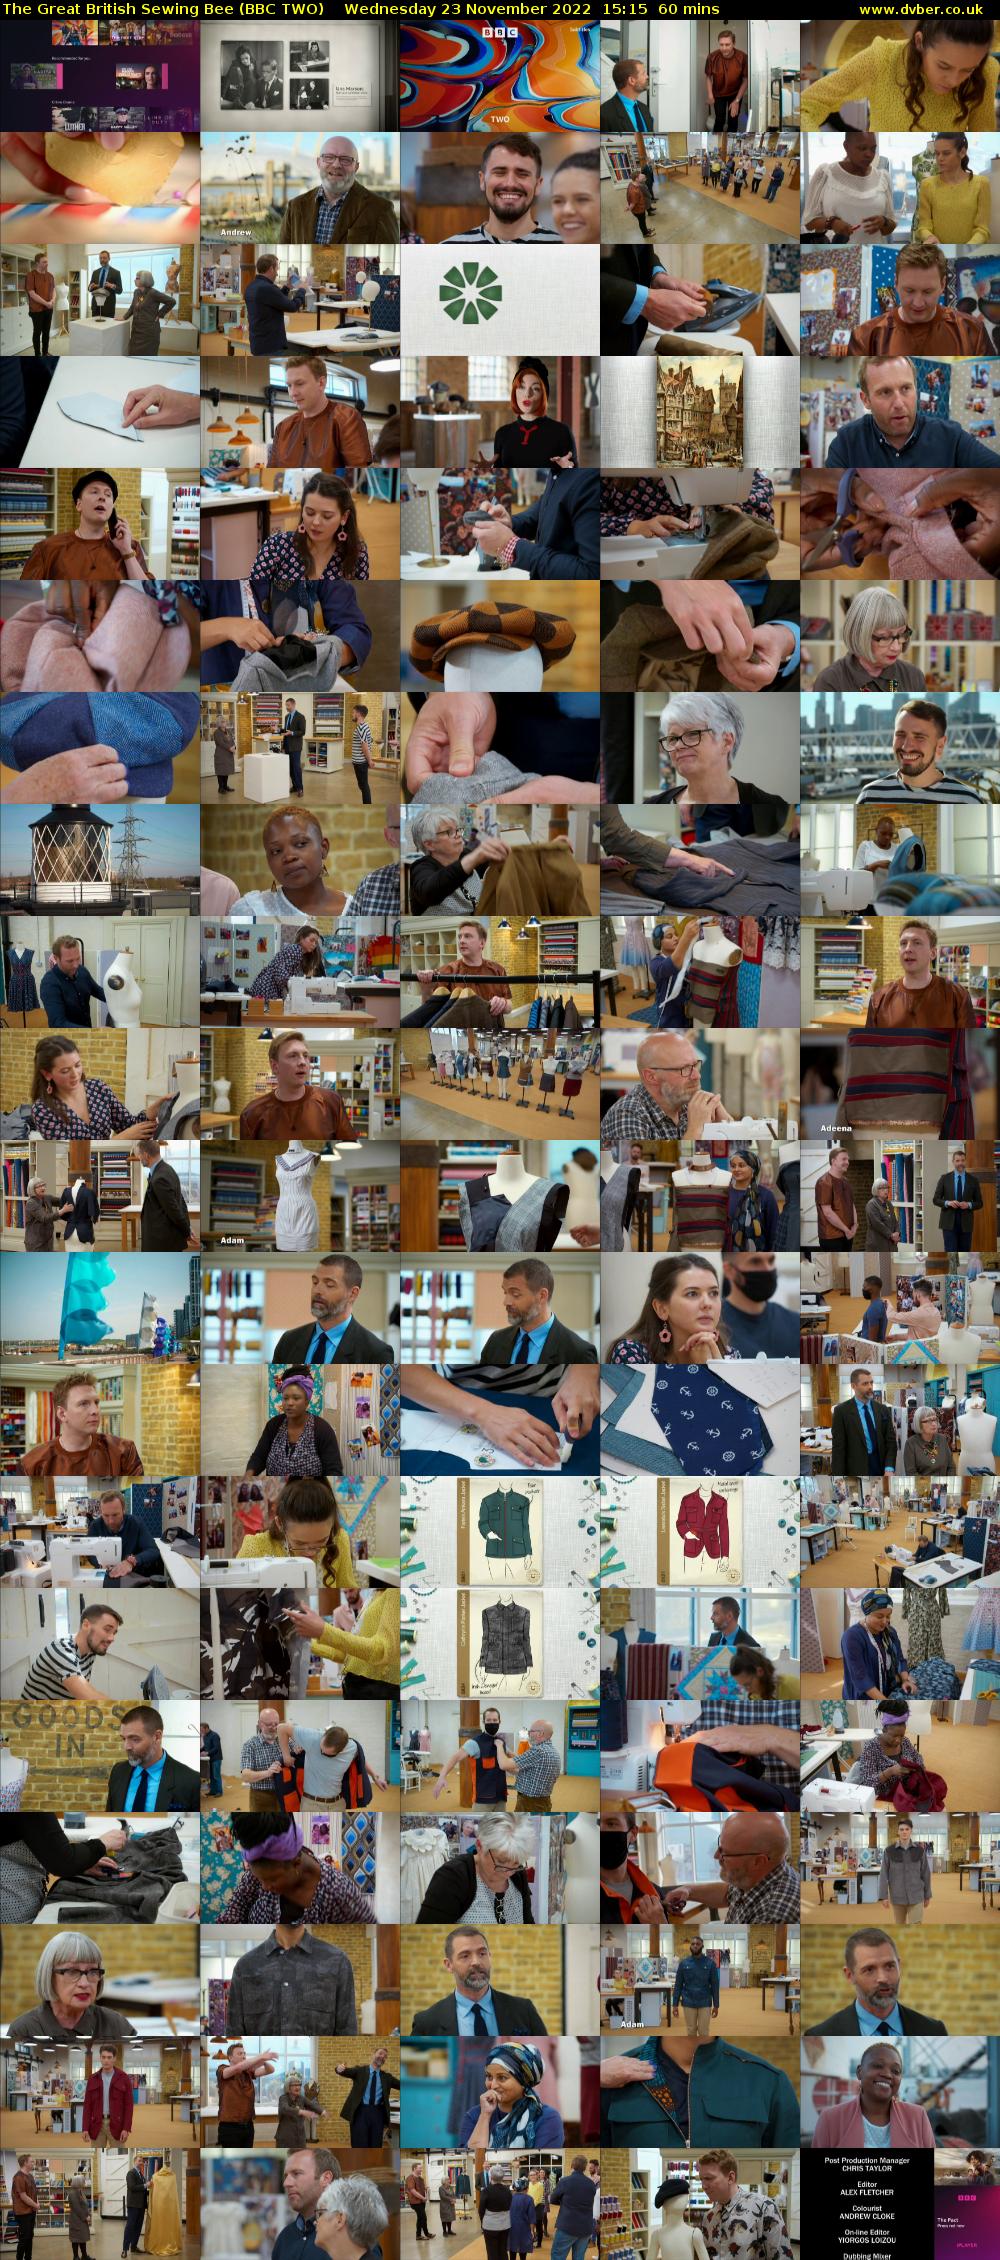 The Great British Sewing Bee (BBC TWO) Wednesday 23 November 2022 15:15 - 16:15